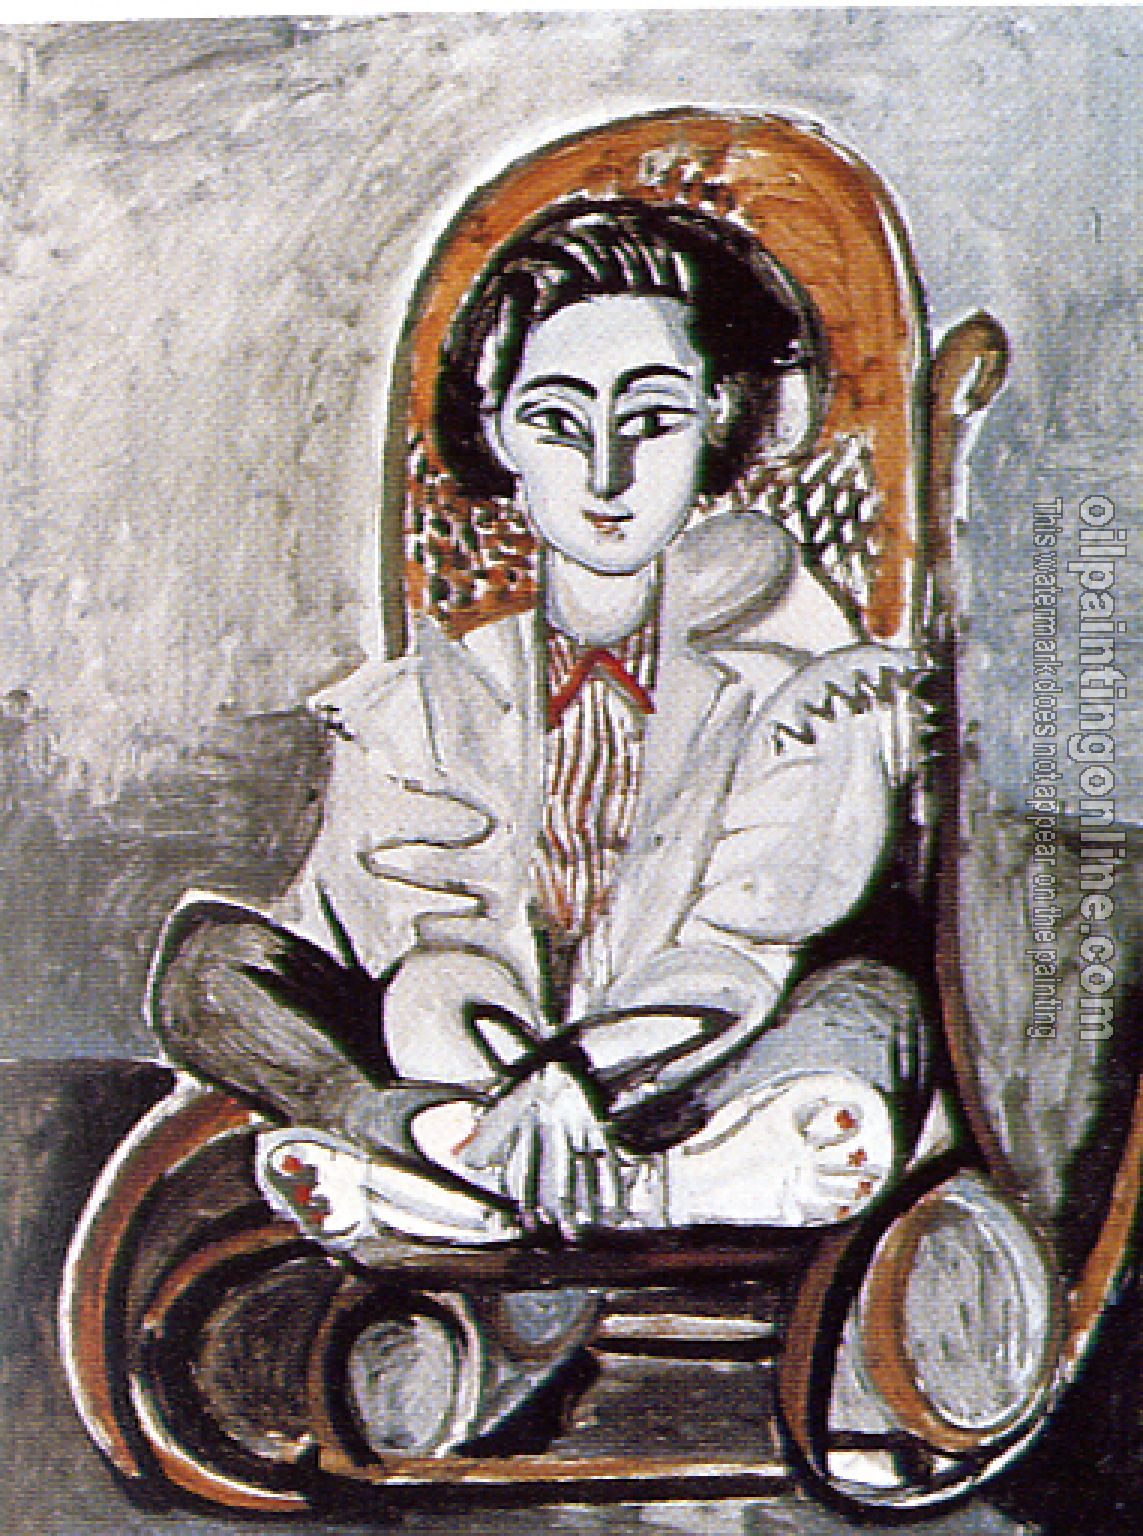 Picasso, Pablo - jacqueline in a rocking chair